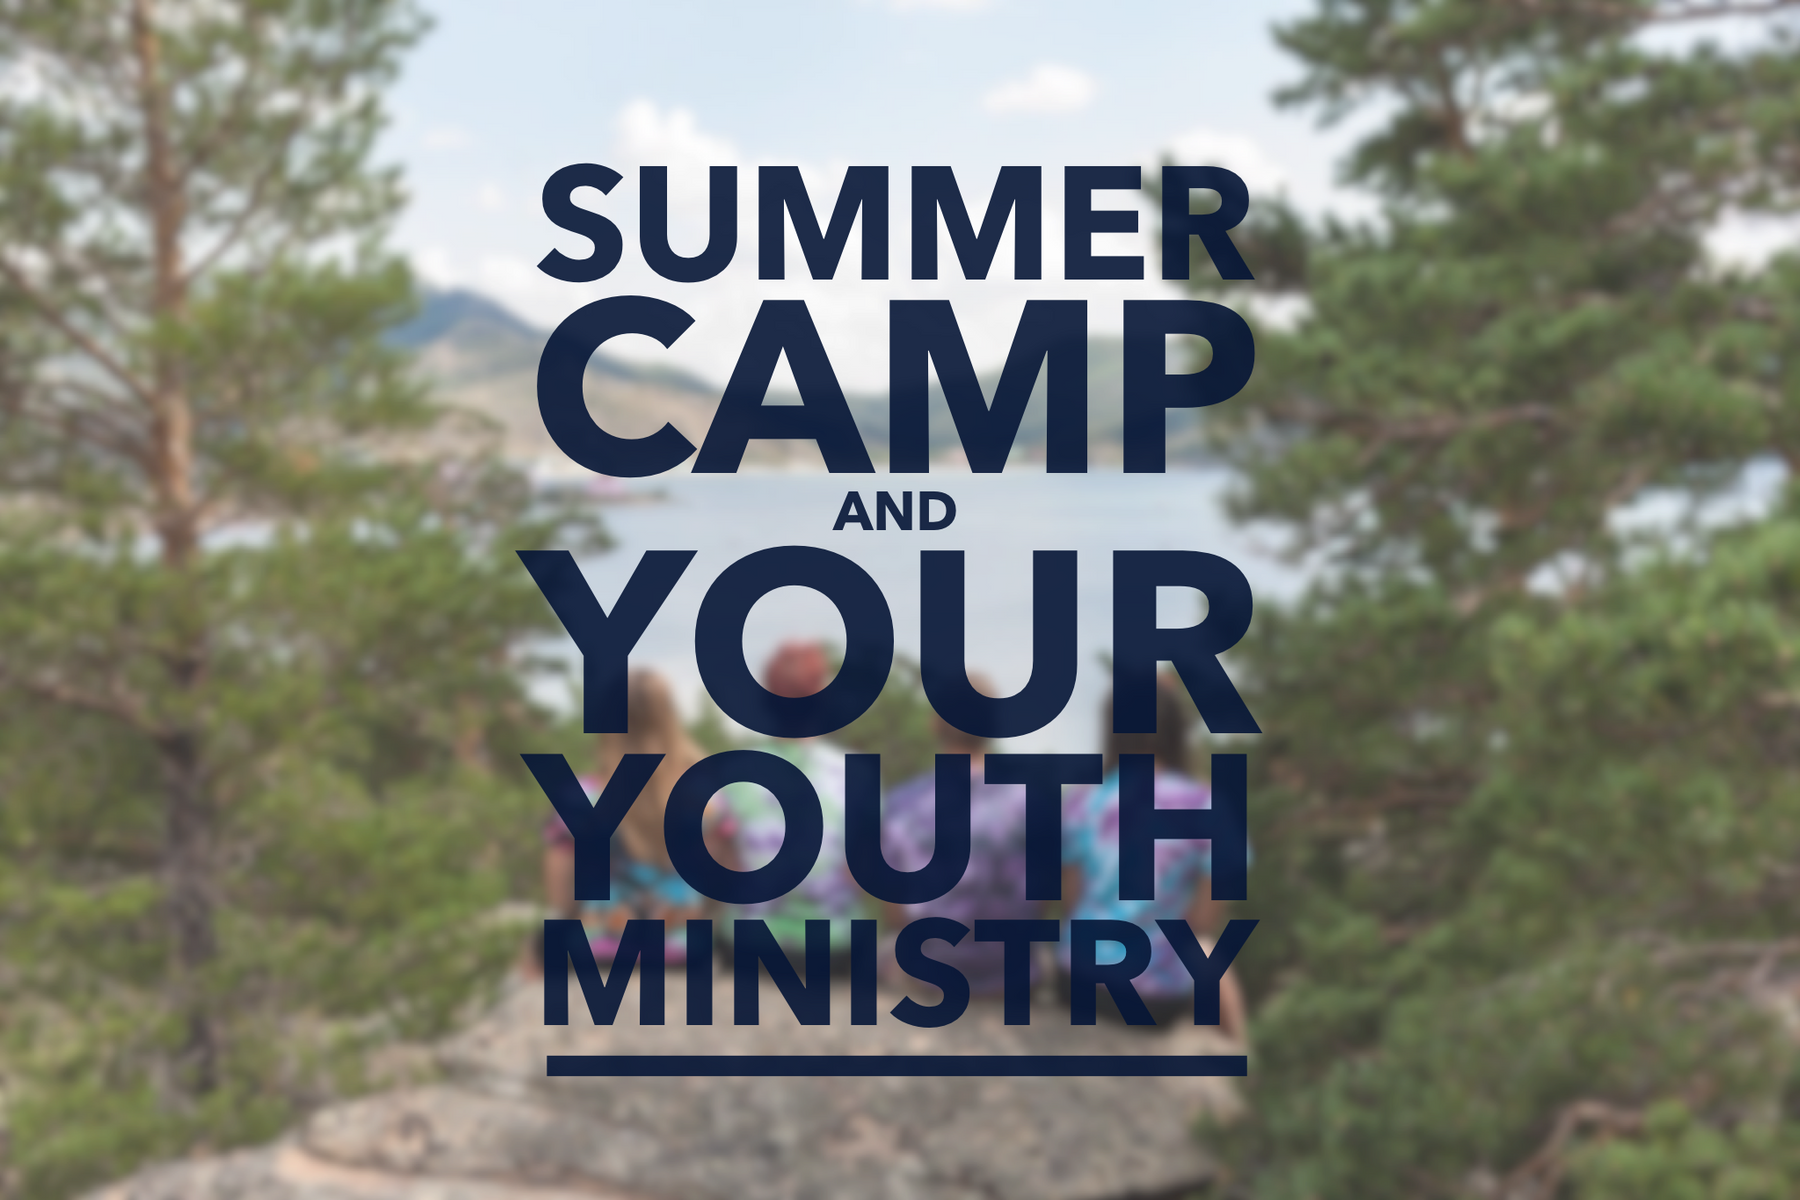 Why Should Summer Camp Be a Part of Your Ministry Strategy?